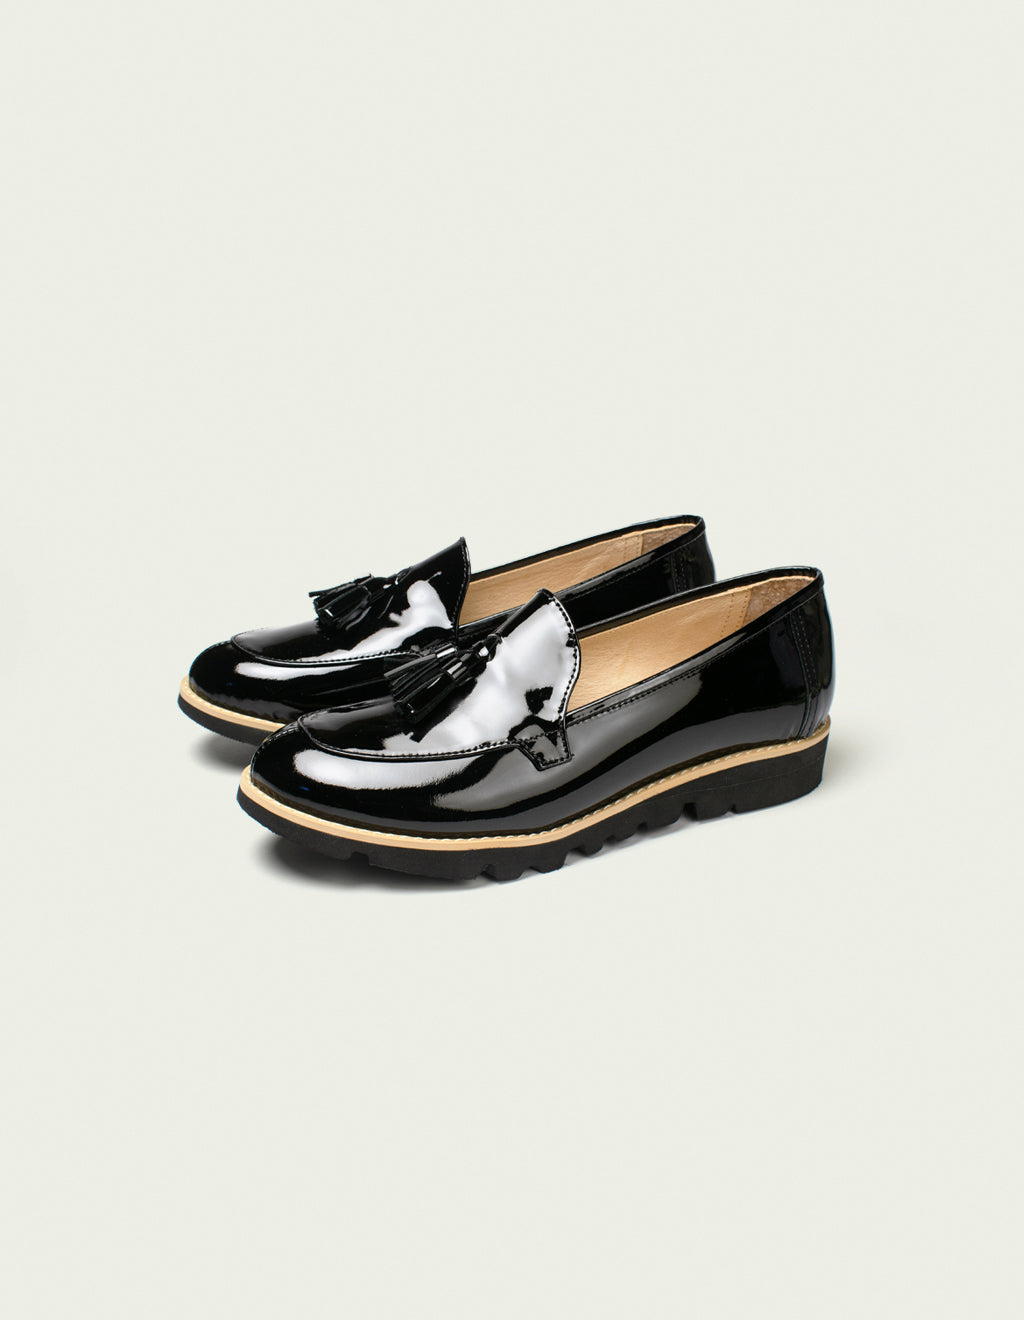 【 materi 】 a-02 | Leather Shoes | patent black